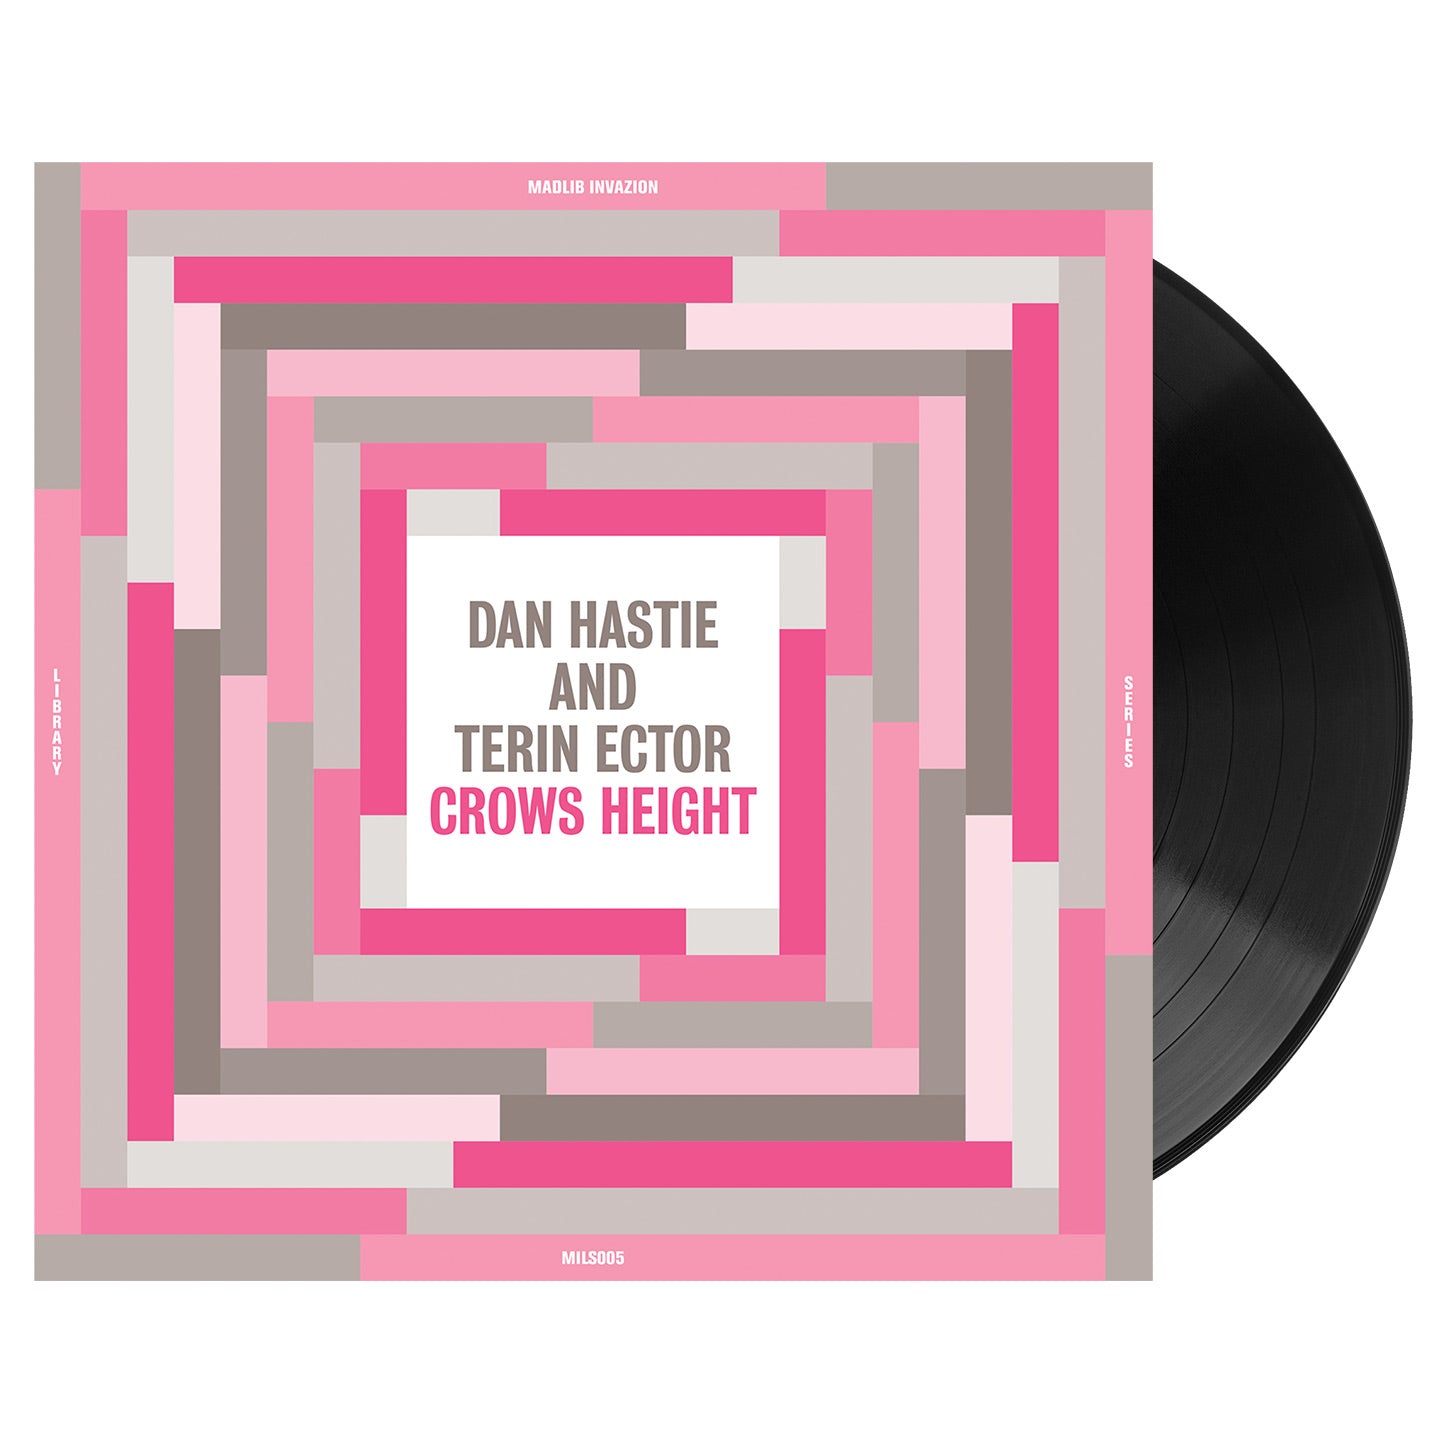 Dan Hastie and Terin Ector - Crow's Height (Madlib Invazion Music Library Series #5)